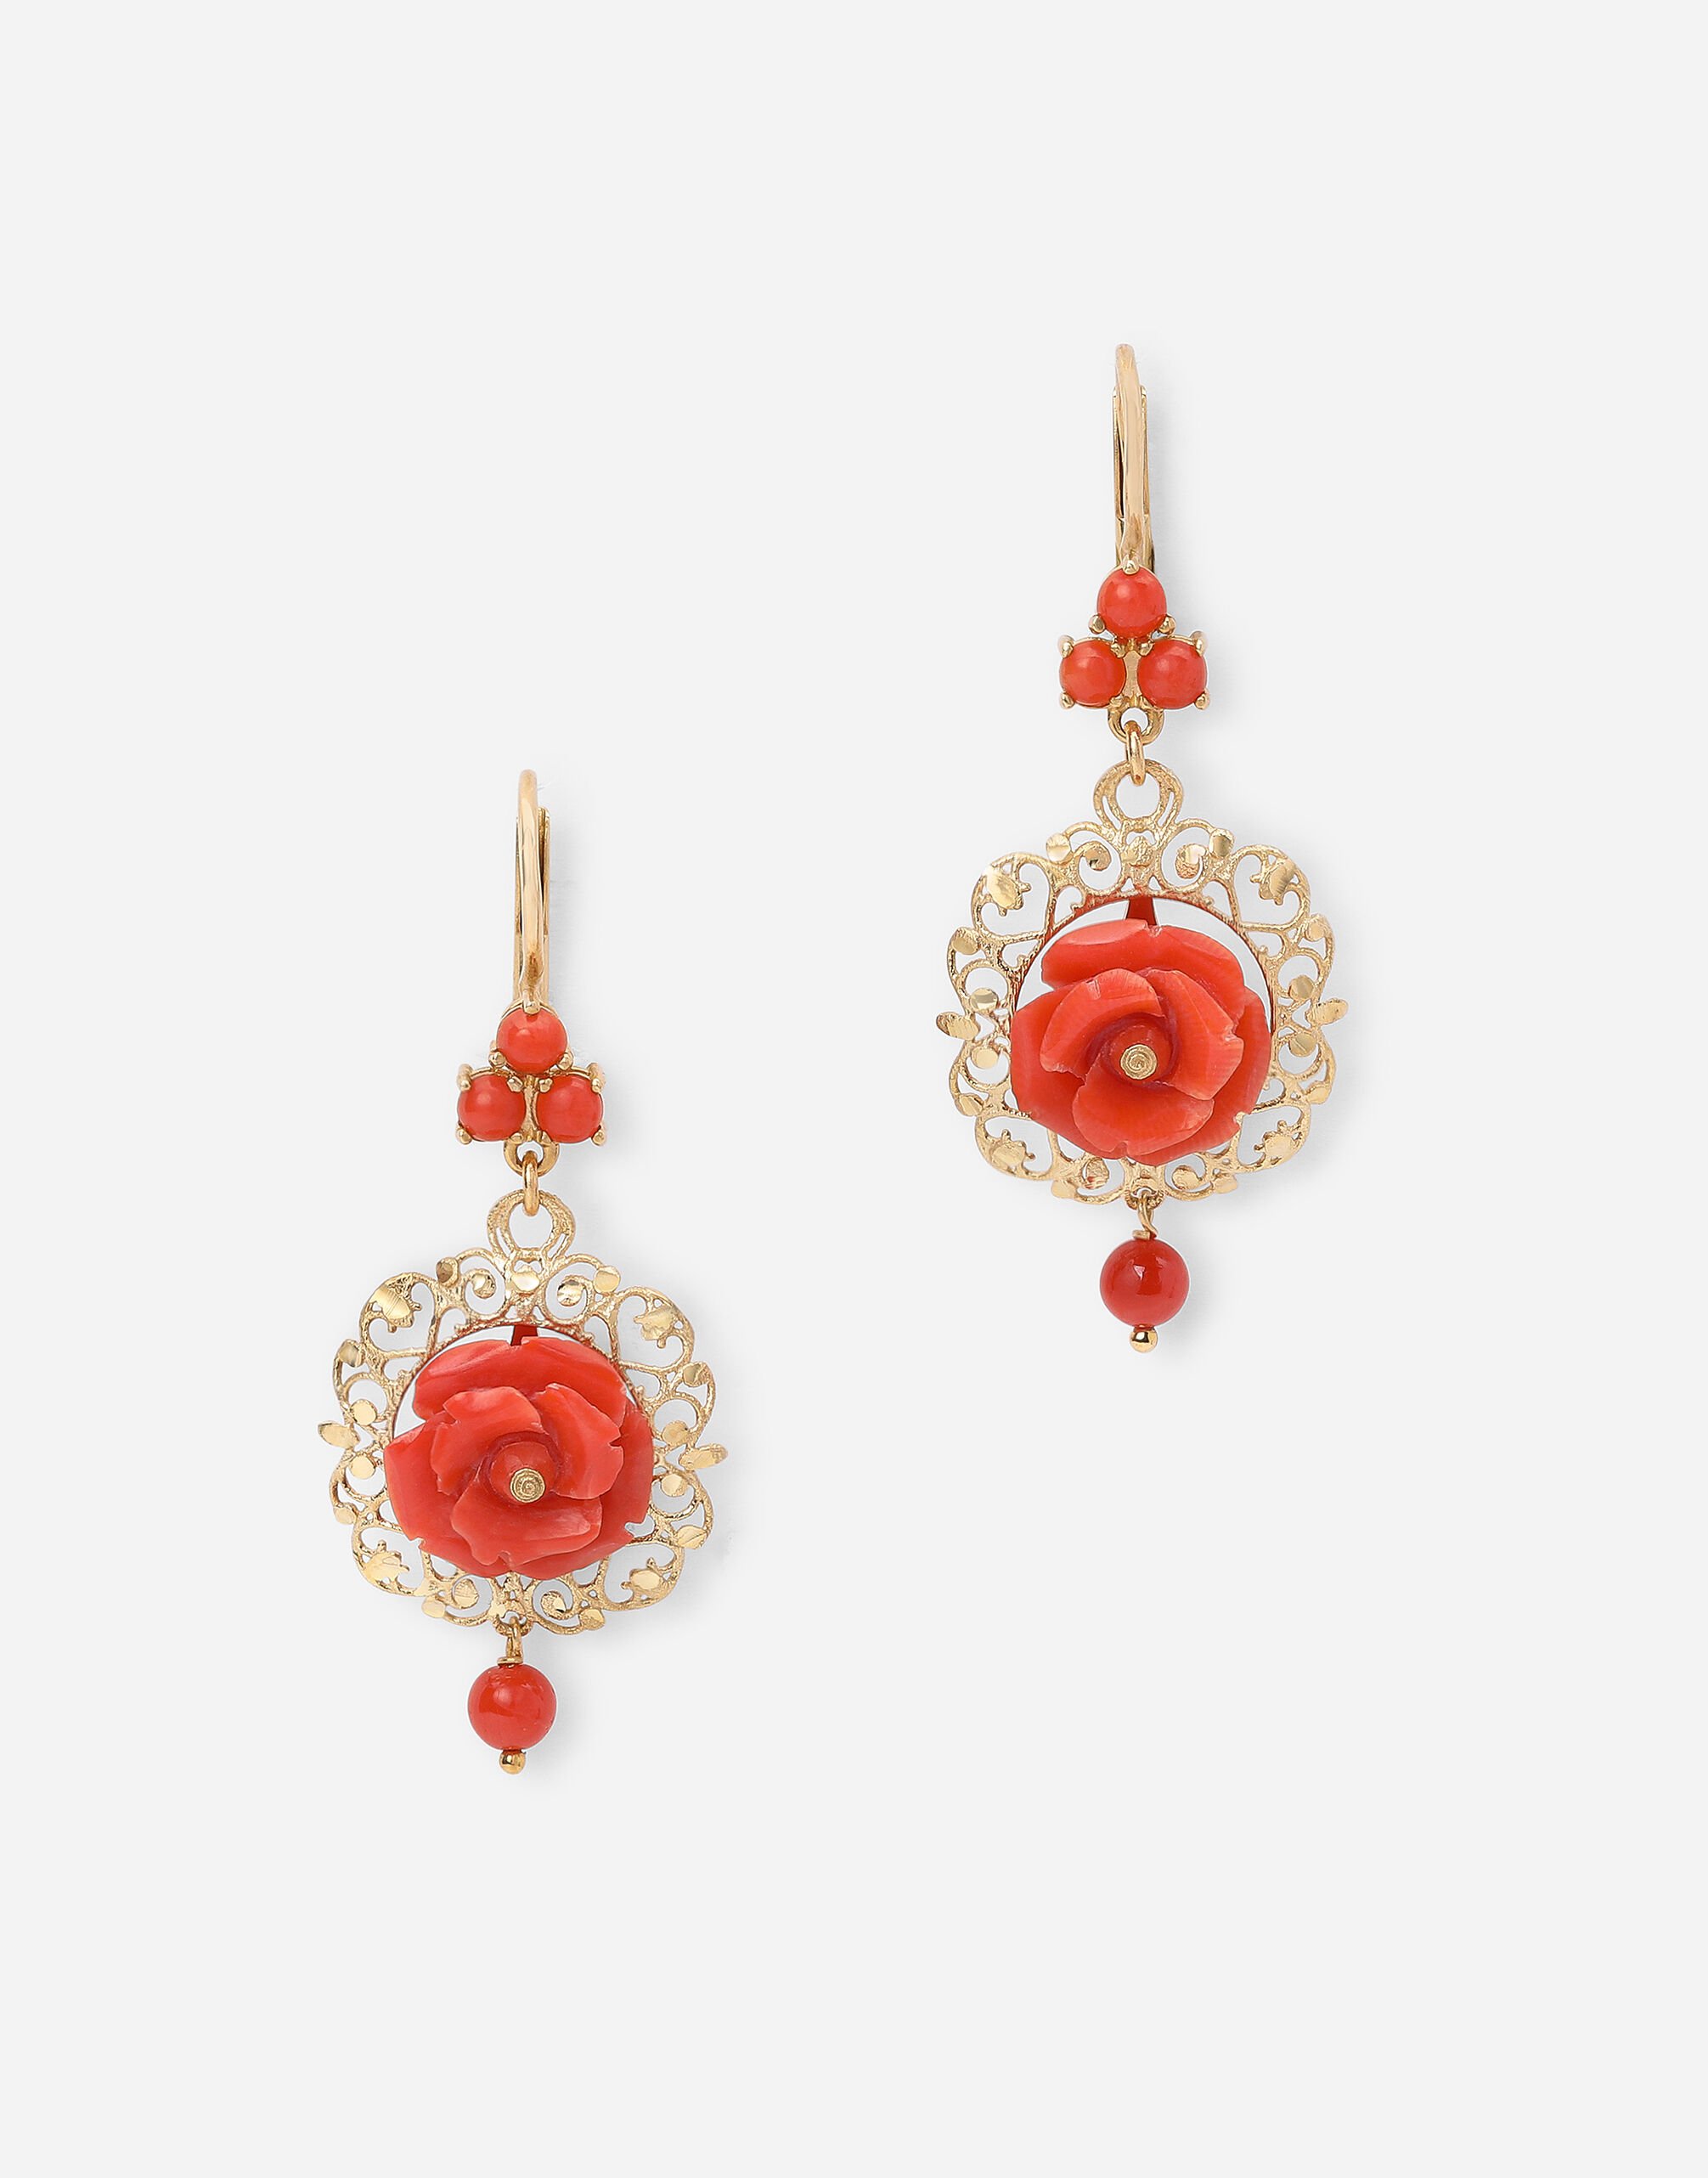 Dolce & Gabbana Coral leverback earrings in yellow 18kt gold with coral roses Black WWJC2SXCMDT